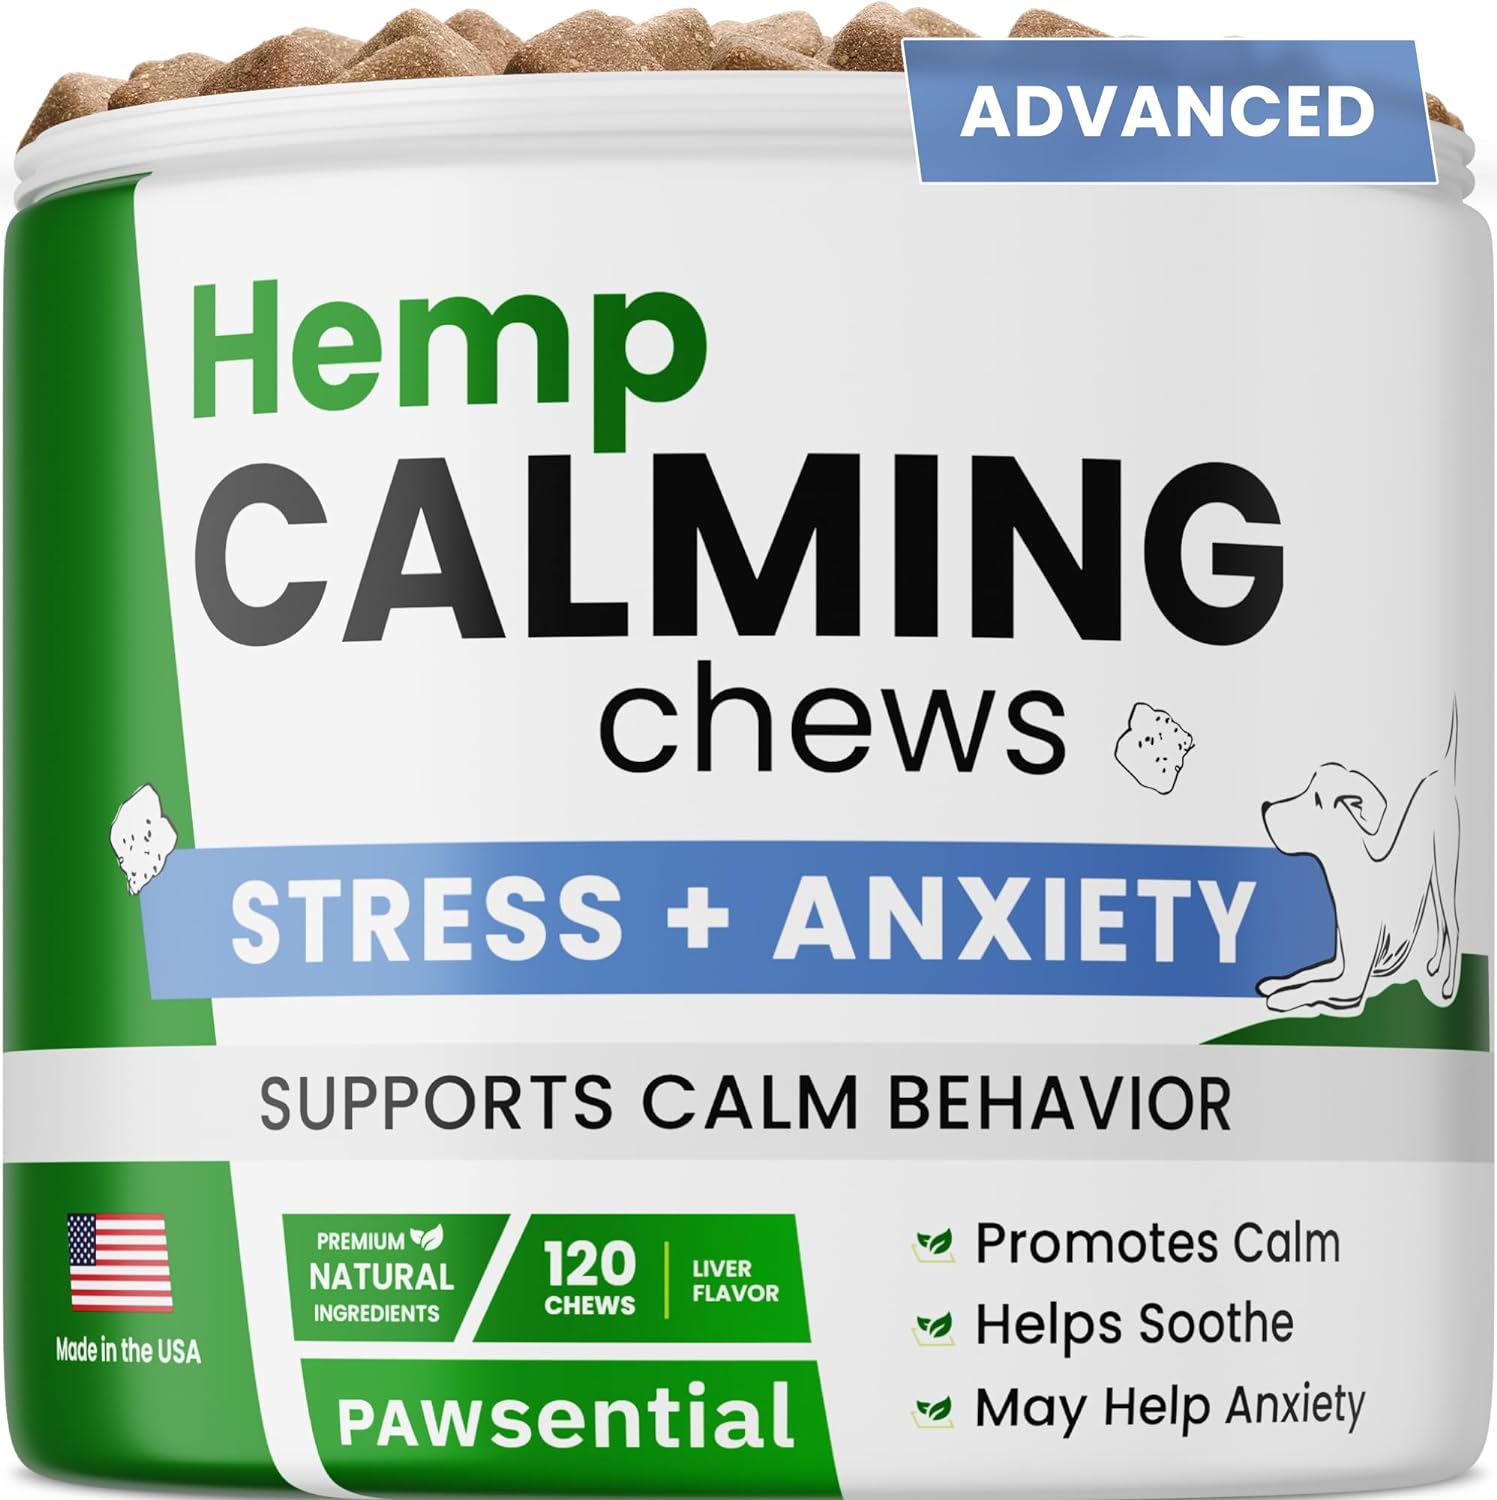 Advanced Hemp Calming Chews - Anxiety Relief Treats w/Melatonin + Valerian Root - Calm & Sleep Aid Bites - Stress Relief During Fireworks Storms Separation - Anti Anxiety - Liver Flavor